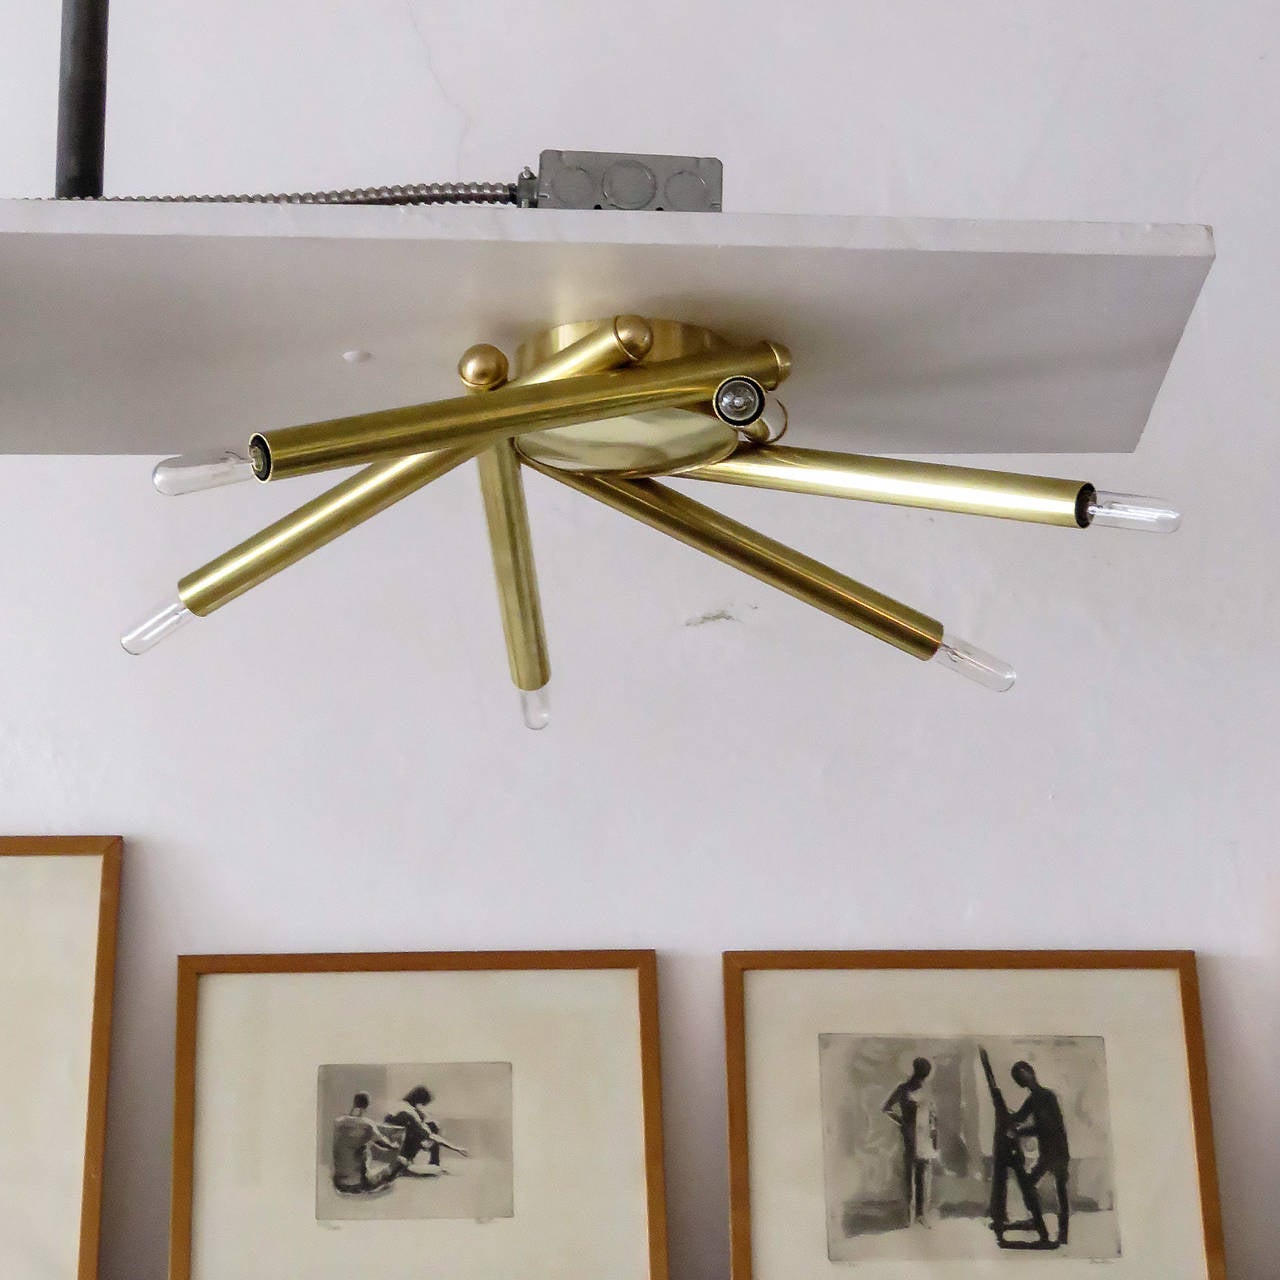 wonderful 6-arm flushmount light by Gallery L7, handcrafted and finished in Los Angeles from American brass in raw brass finish, 24 inch diameter, can be used as wall or ceiling light, available in different sizes and finishes, six E12 sockets per